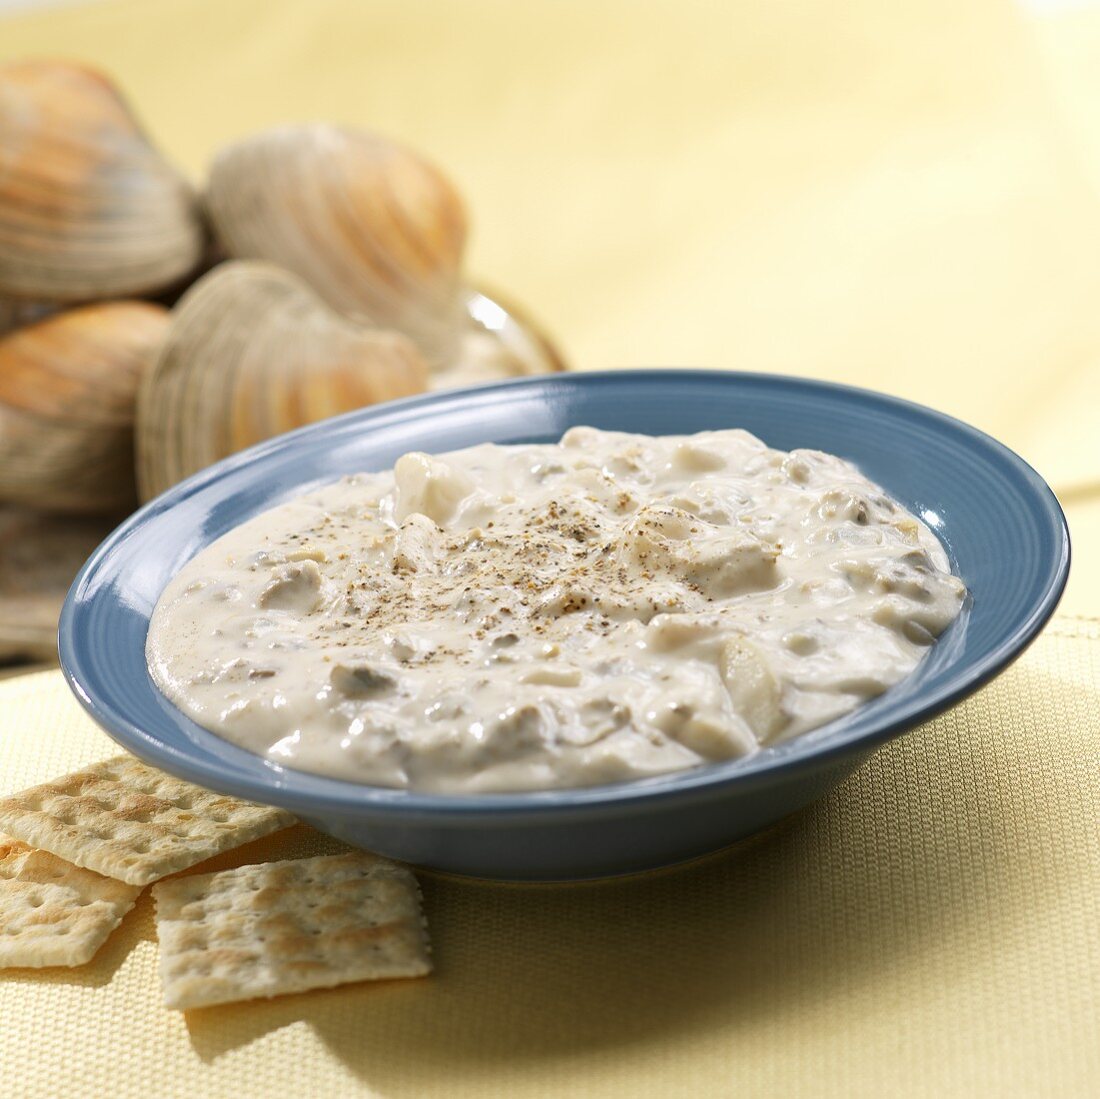 Bowl of Clam Chowder with Crackers